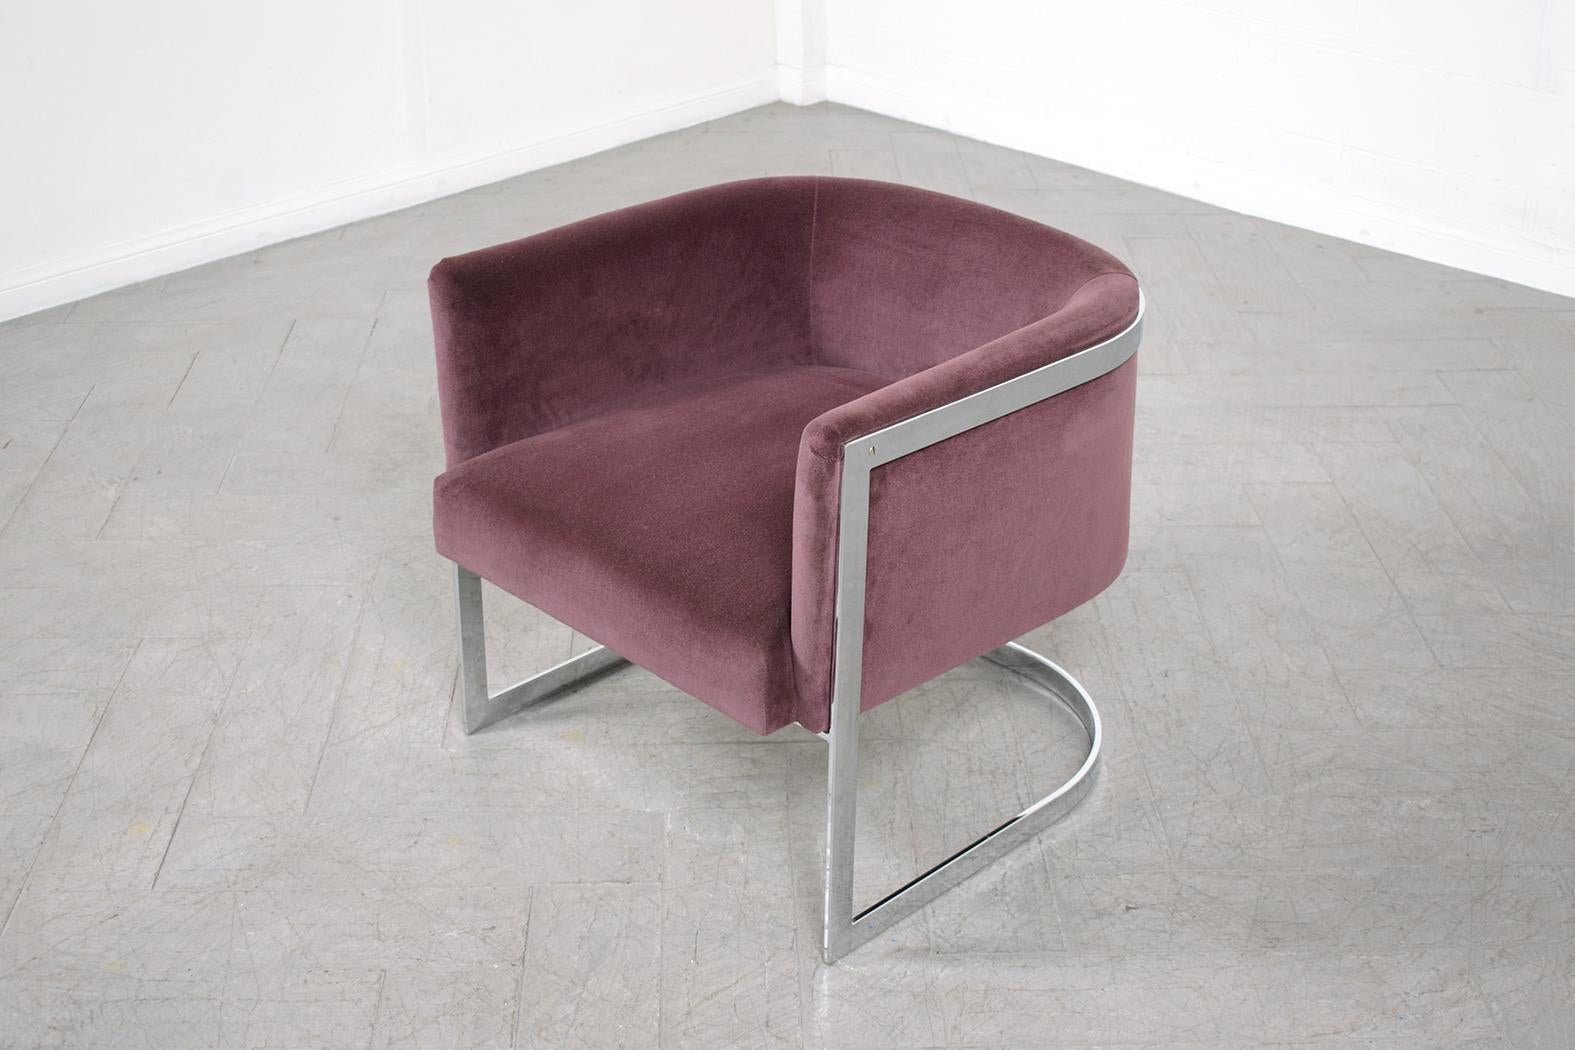 Hand-Crafted 1970s Mid-Century Lounge Chair: Chrome Steel Frame & Purple Velvet Upholstery For Sale